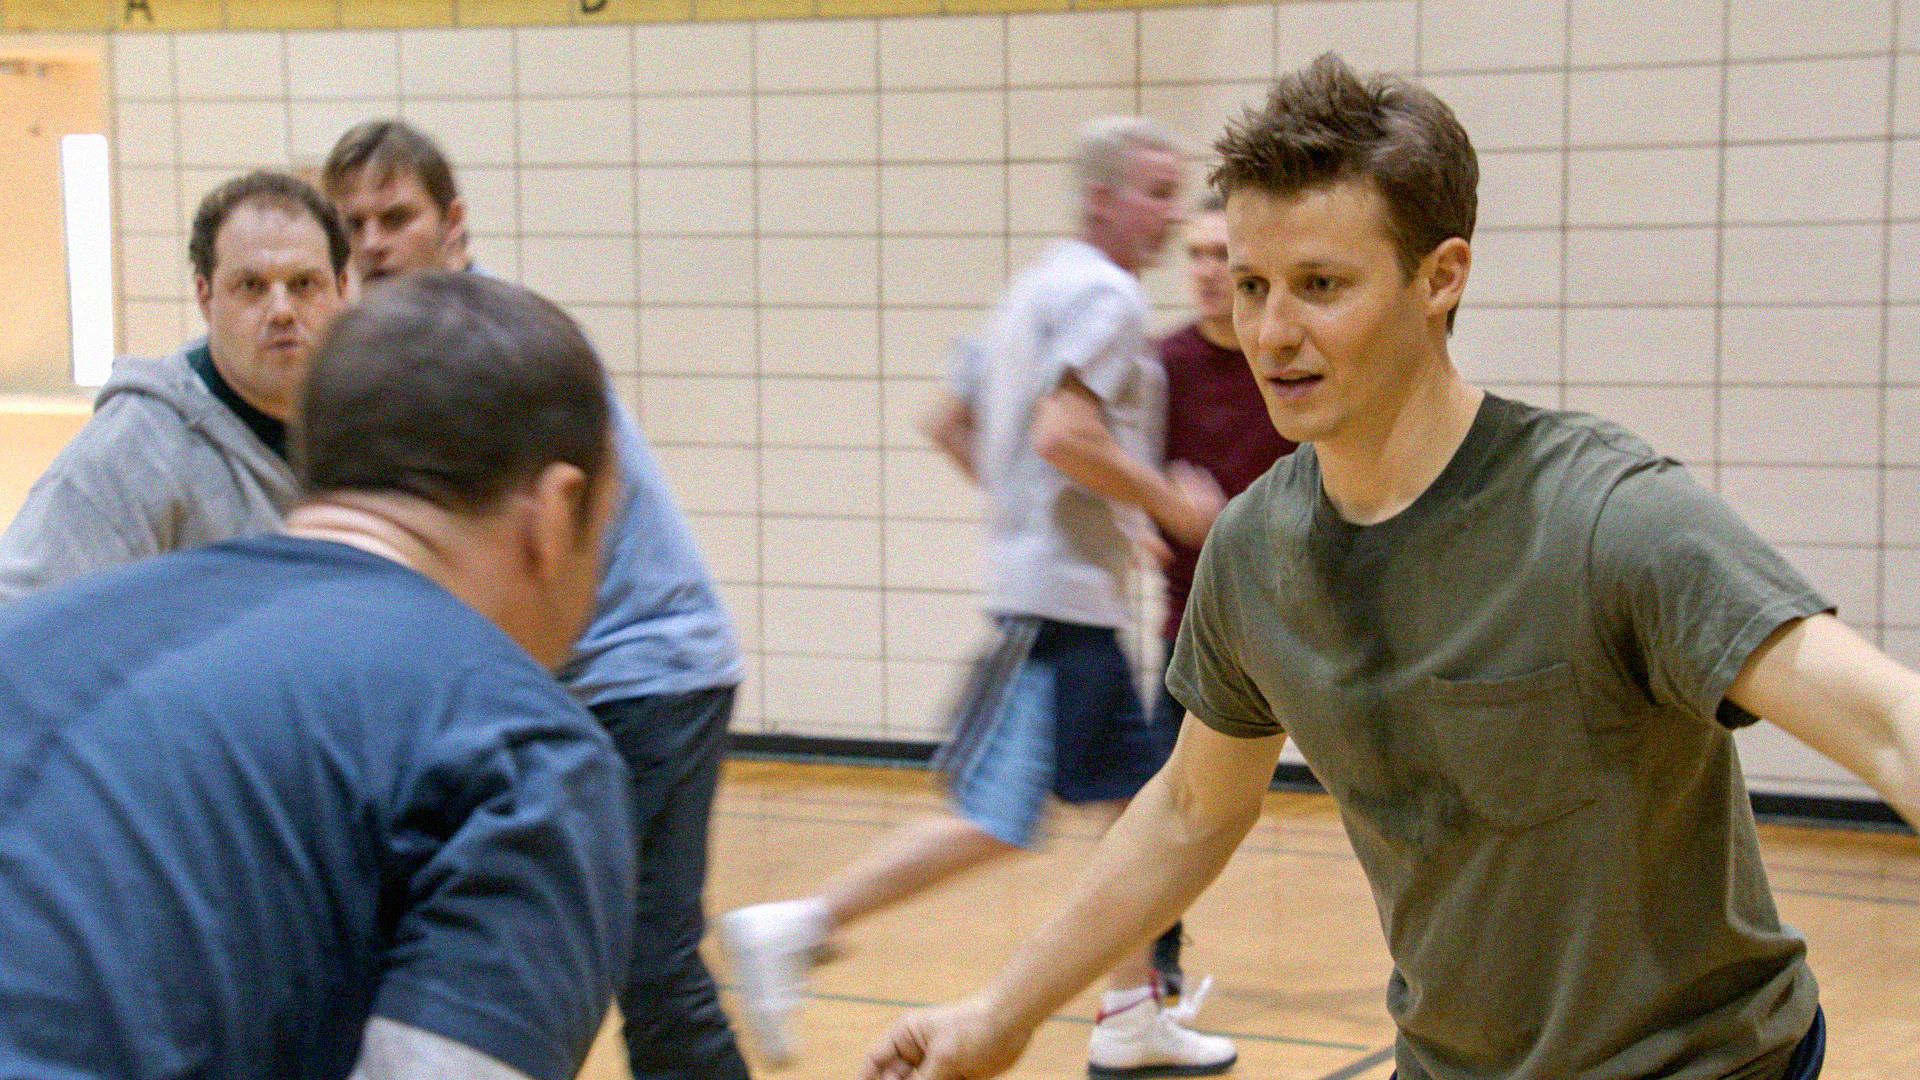 4. Will Estes sometimes plays basketball between scenes if there's a court nearby. 